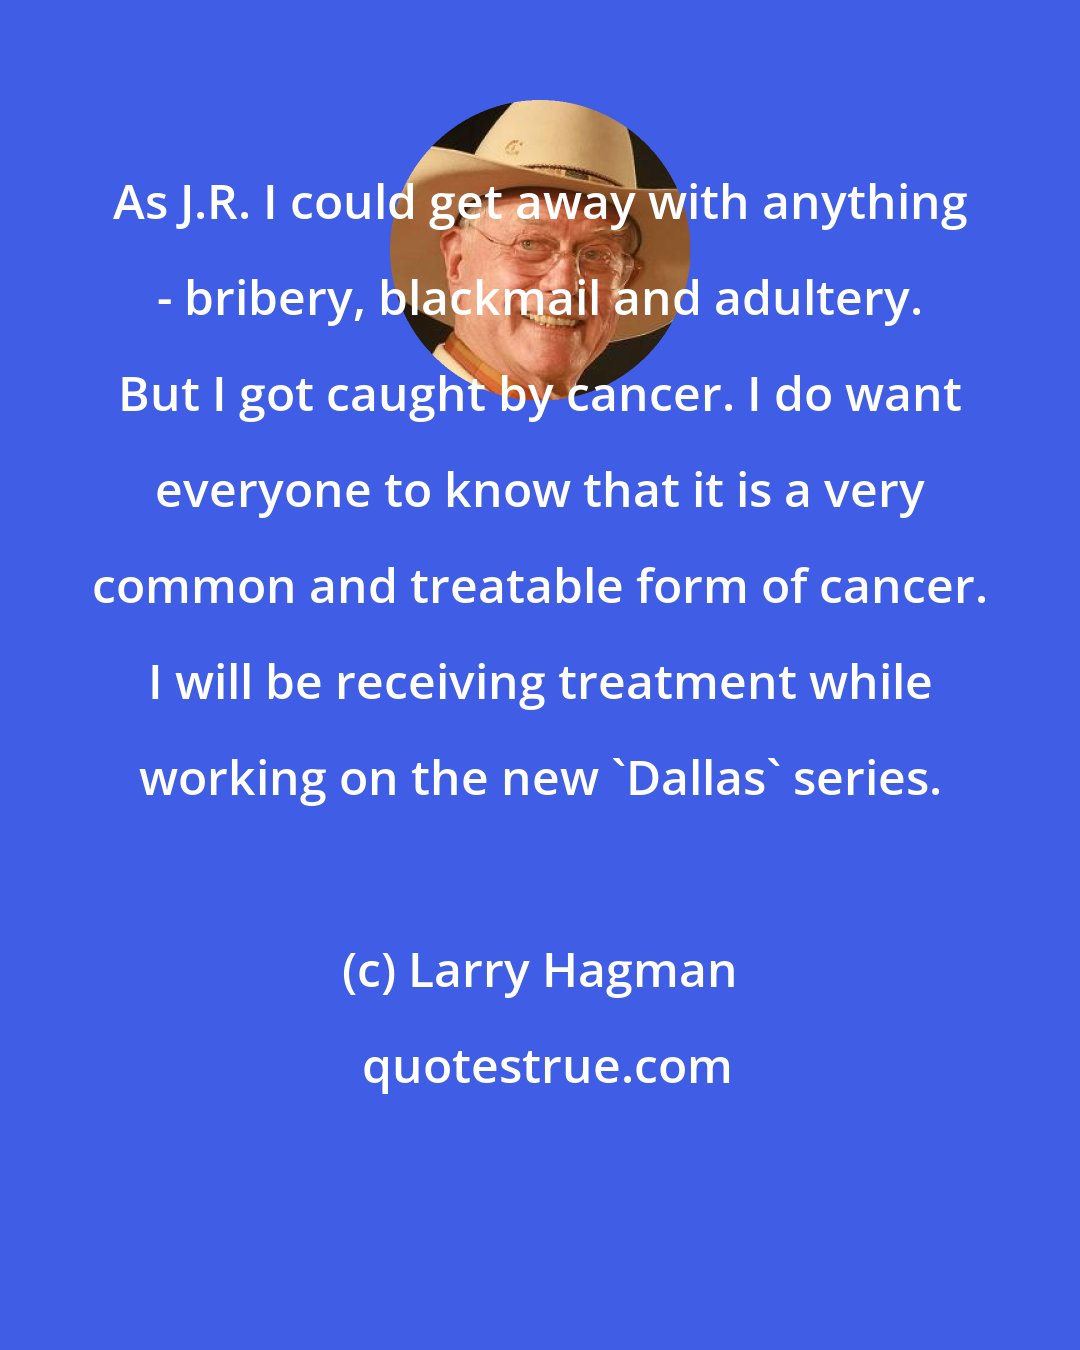 Larry Hagman: As J.R. I could get away with anything - bribery, blackmail and adultery. But I got caught by cancer. I do want everyone to know that it is a very common and treatable form of cancer. I will be receiving treatment while working on the new 'Dallas' series.